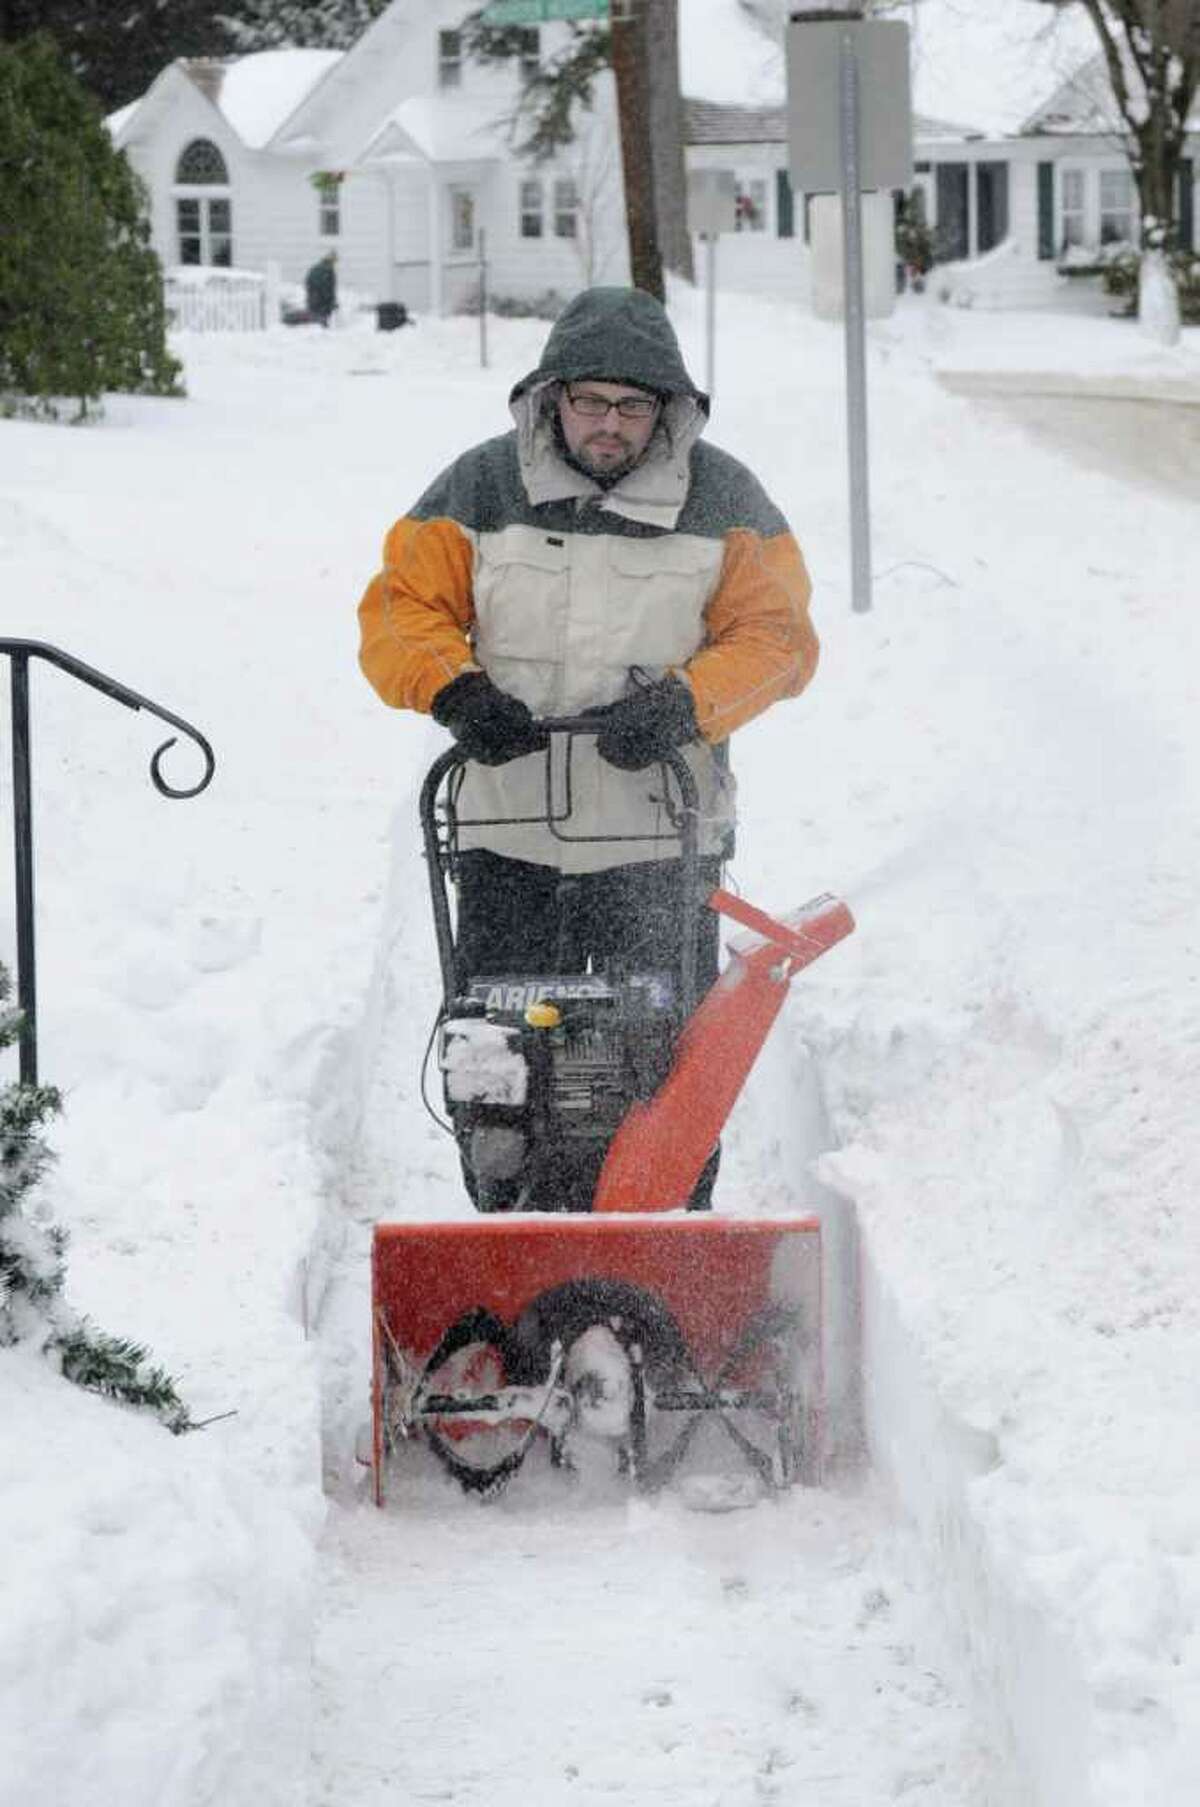 Roma Le Blanc, uses his snow thrower to clear a path on the sidewalk in front of his Danbury home on, Monday, Dec. 27, 2010.